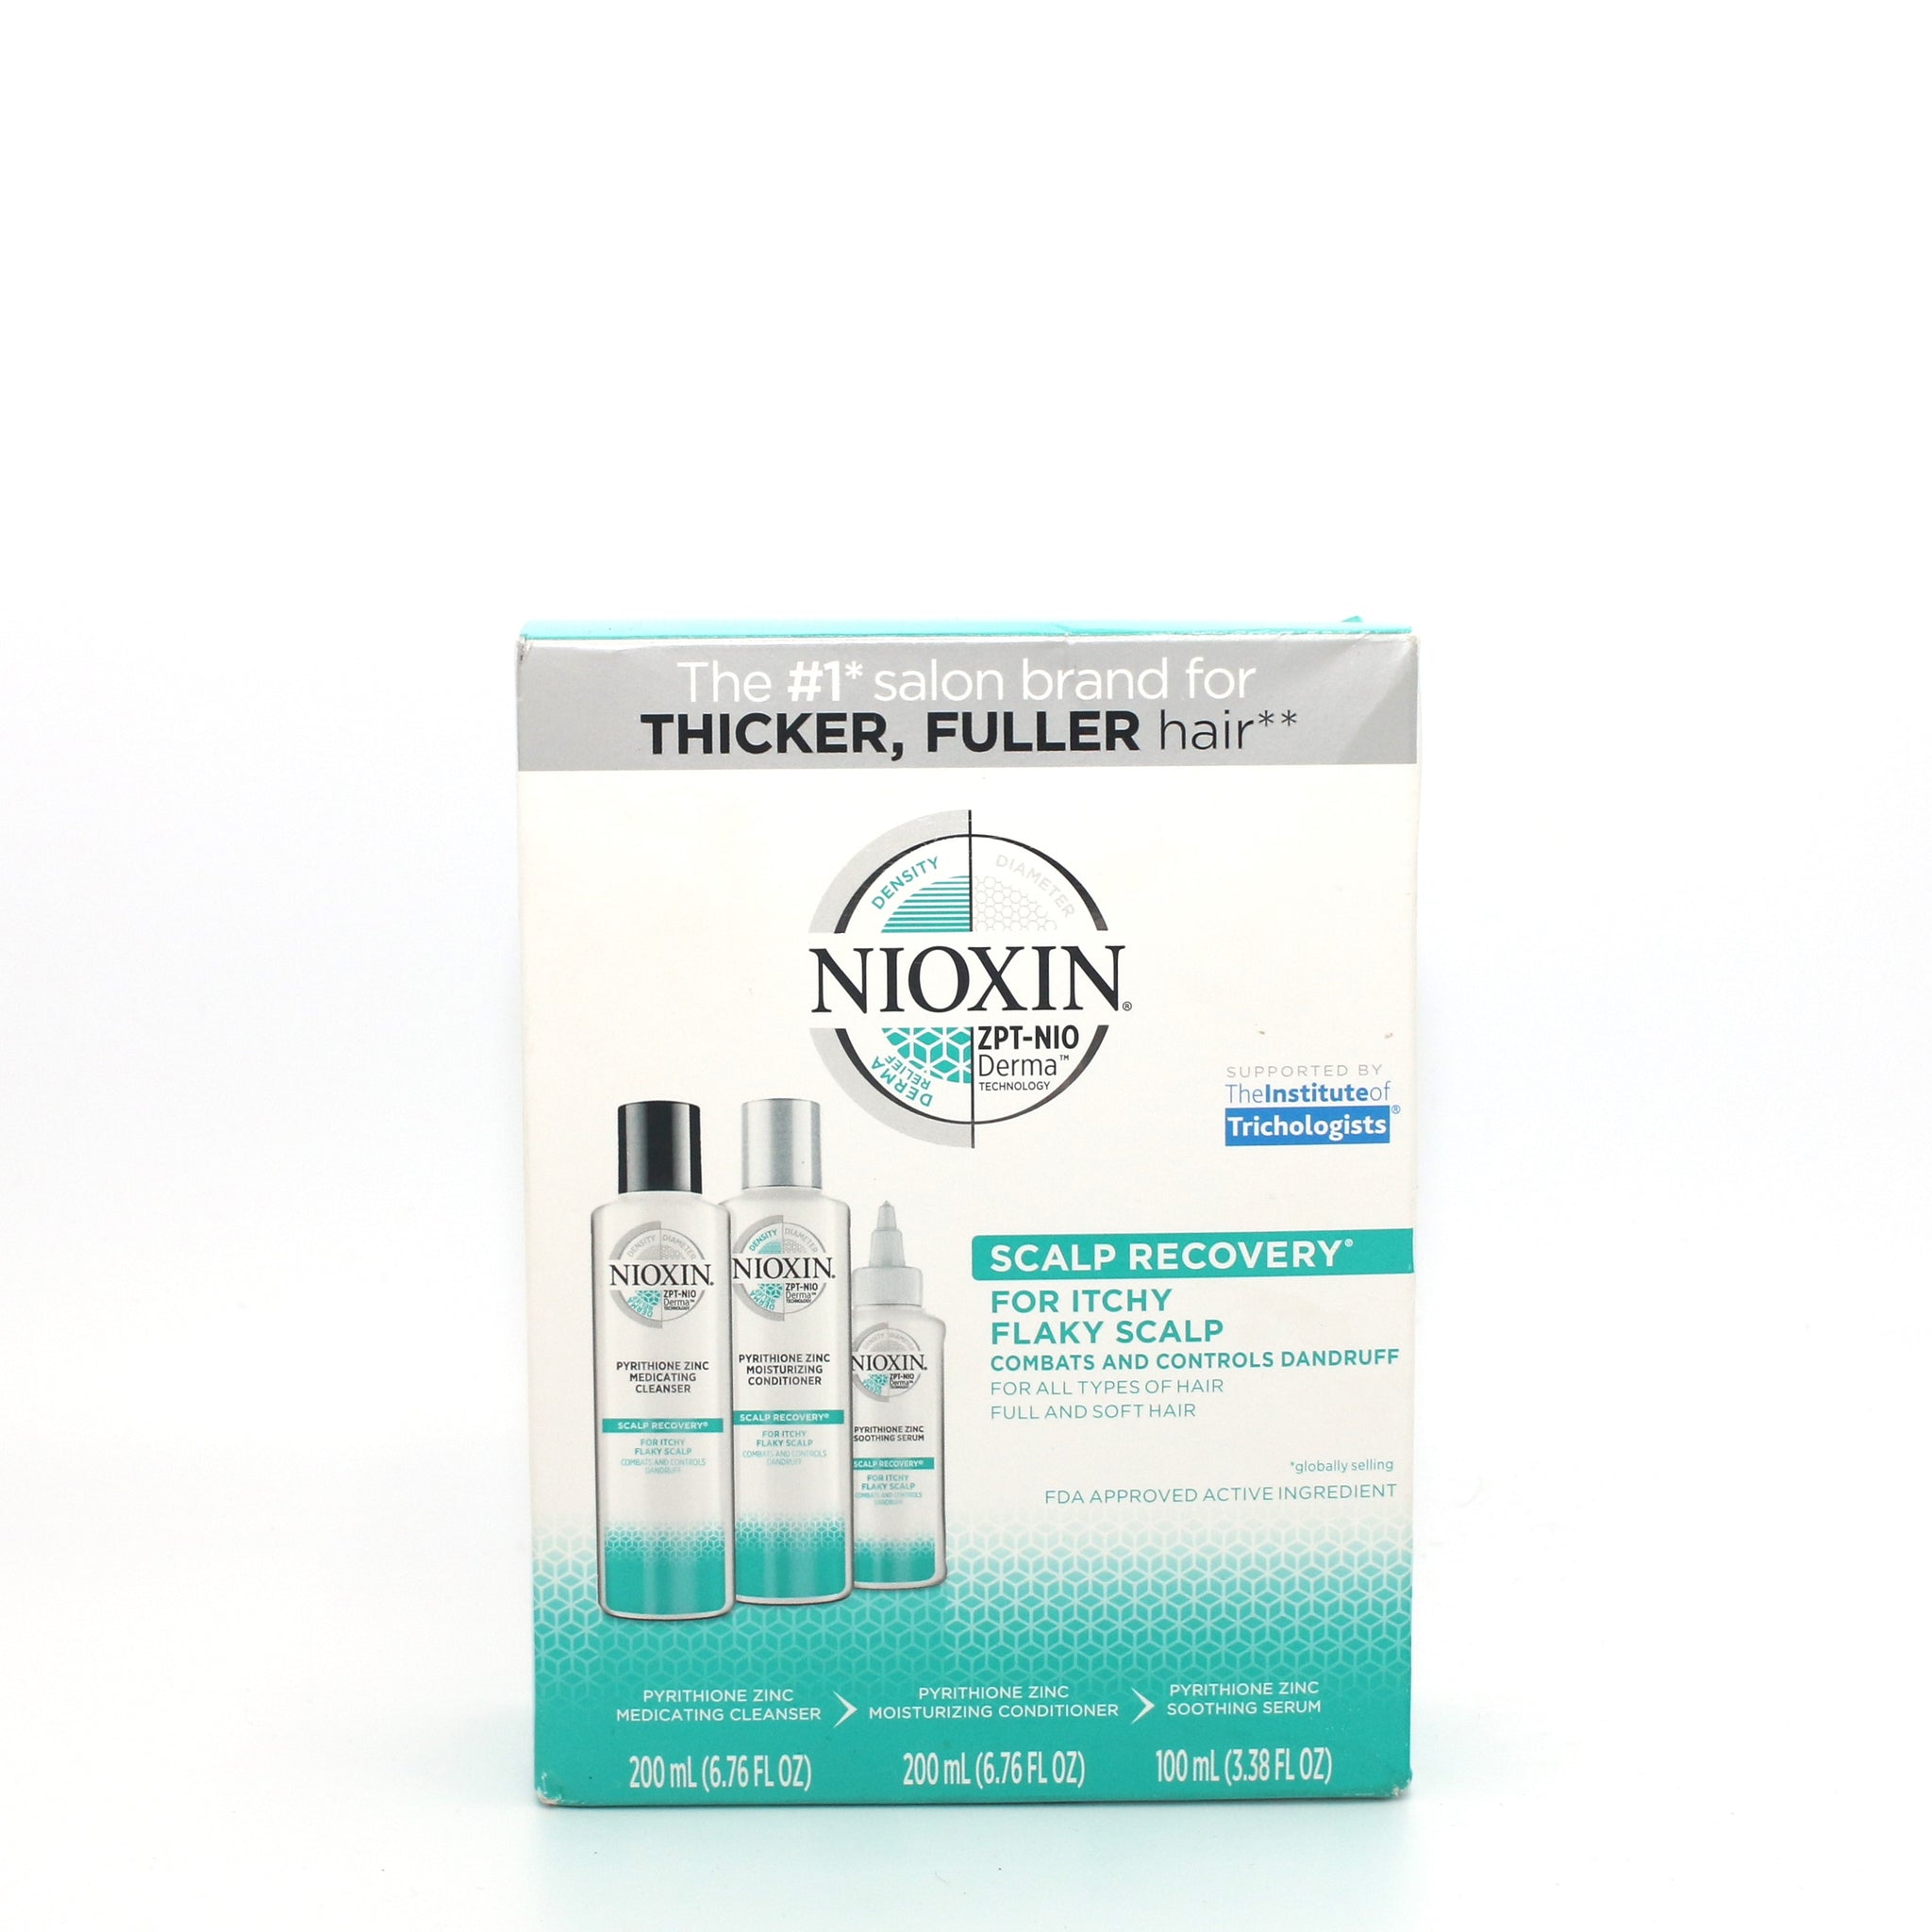 NIOXIN Scalp Recovery Kit For Itchy Flaky Scalp Shampoo, Conditioner & Serum